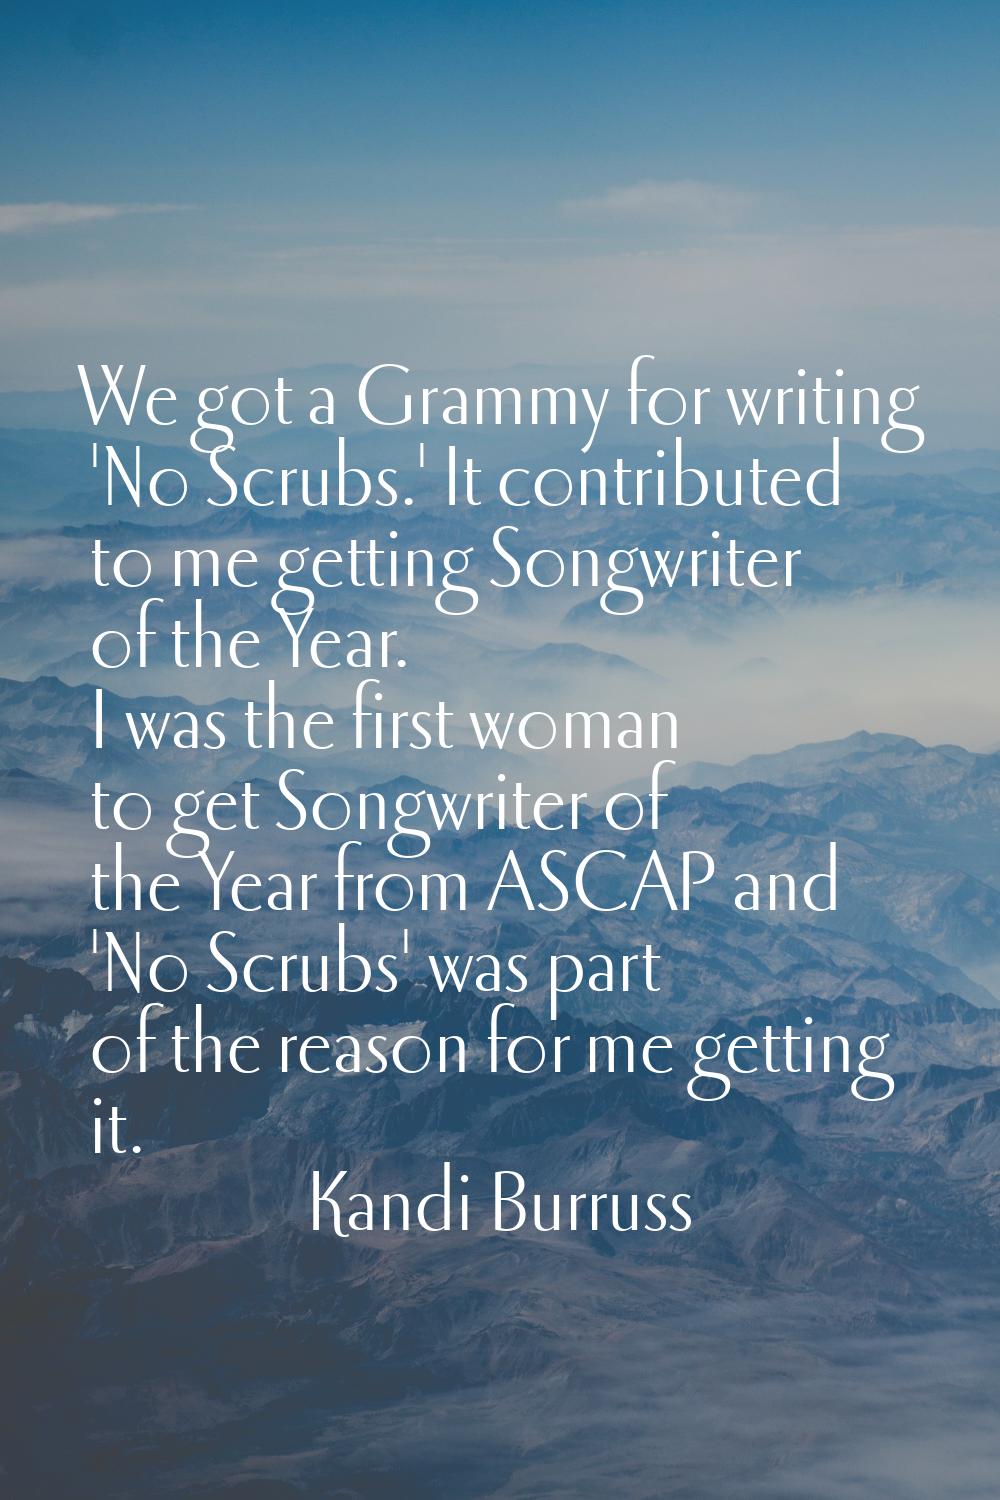 We got a Grammy for writing 'No Scrubs.' It contributed to me getting Songwriter of the Year. I was